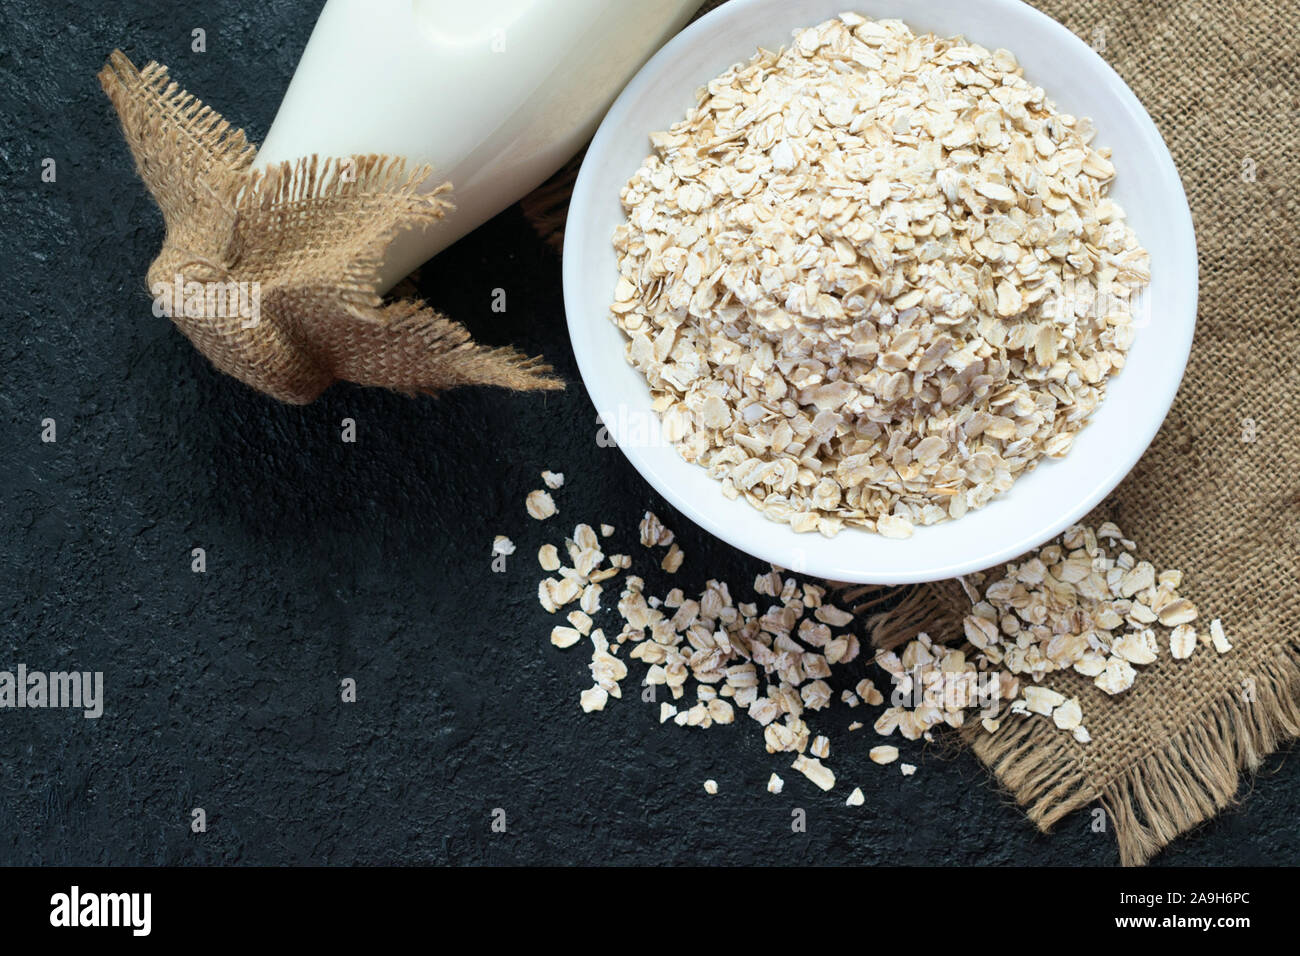 A bottle of oat milk and a plate of oatmeal on a black background. The concept of vegetarian food. Stock Photo